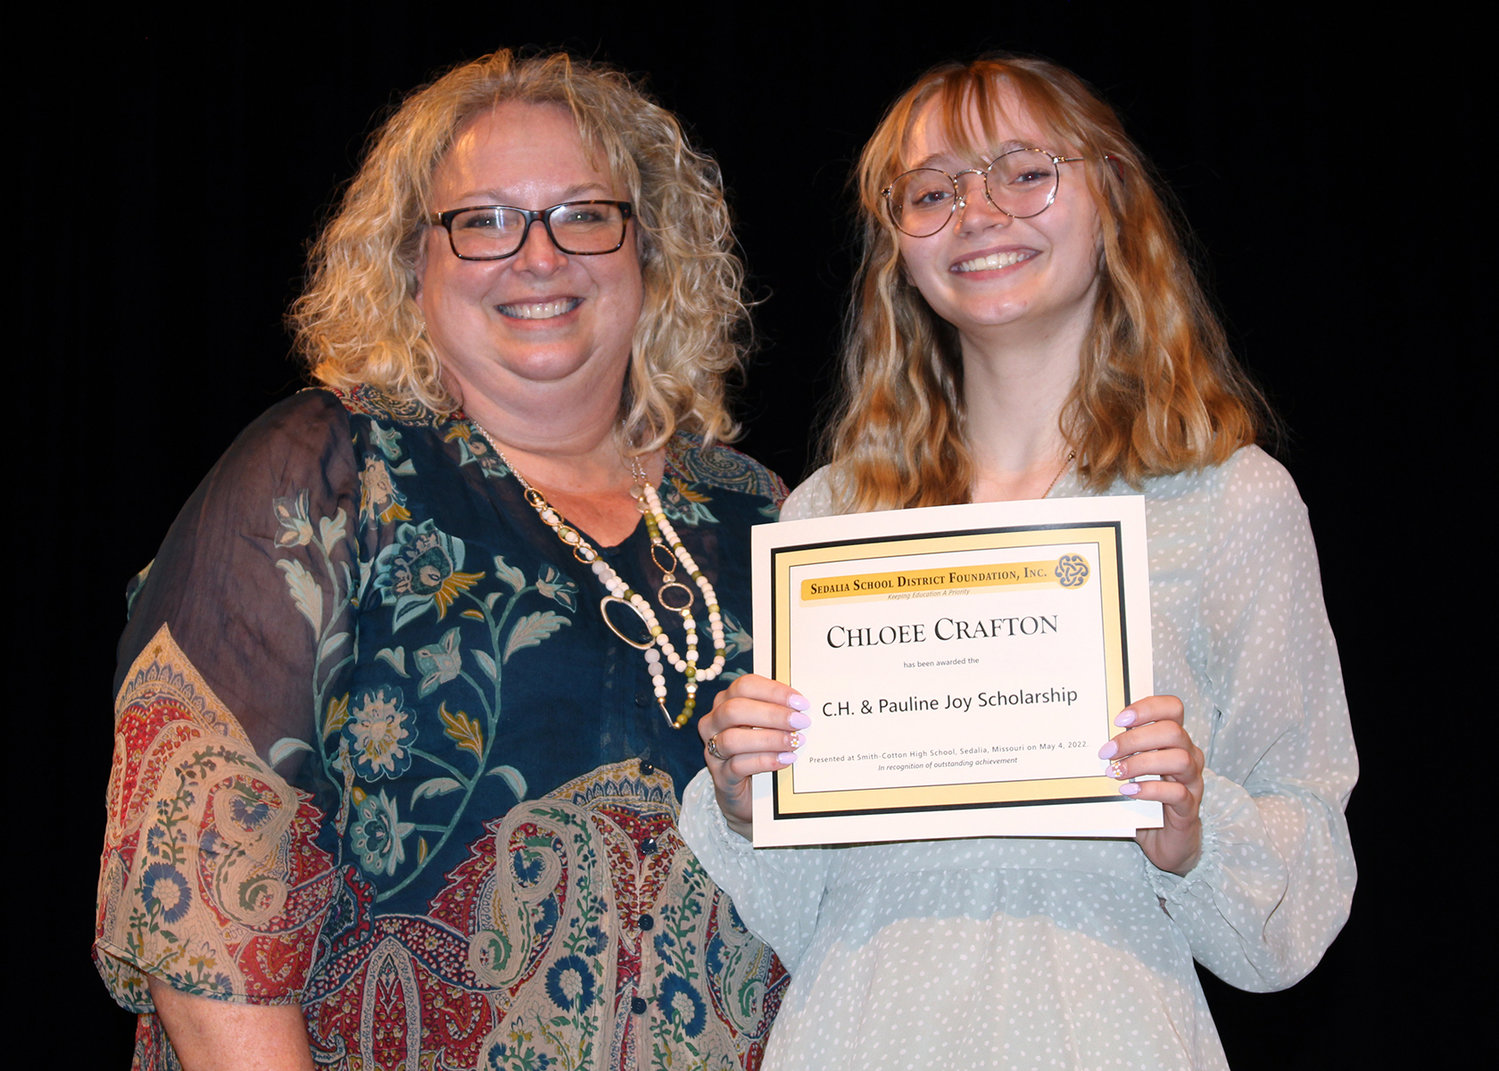 Smith-Cotton High School Counselor Pam Crafton, left, presents her granddaughter, Chloee, the C.H. & Pauline Joy Scholarship during Senior Awards Night on May 4 in the Heckart Performing Arts Center. Pam Crafton died unexpectedly on Monday, Sept. 26.